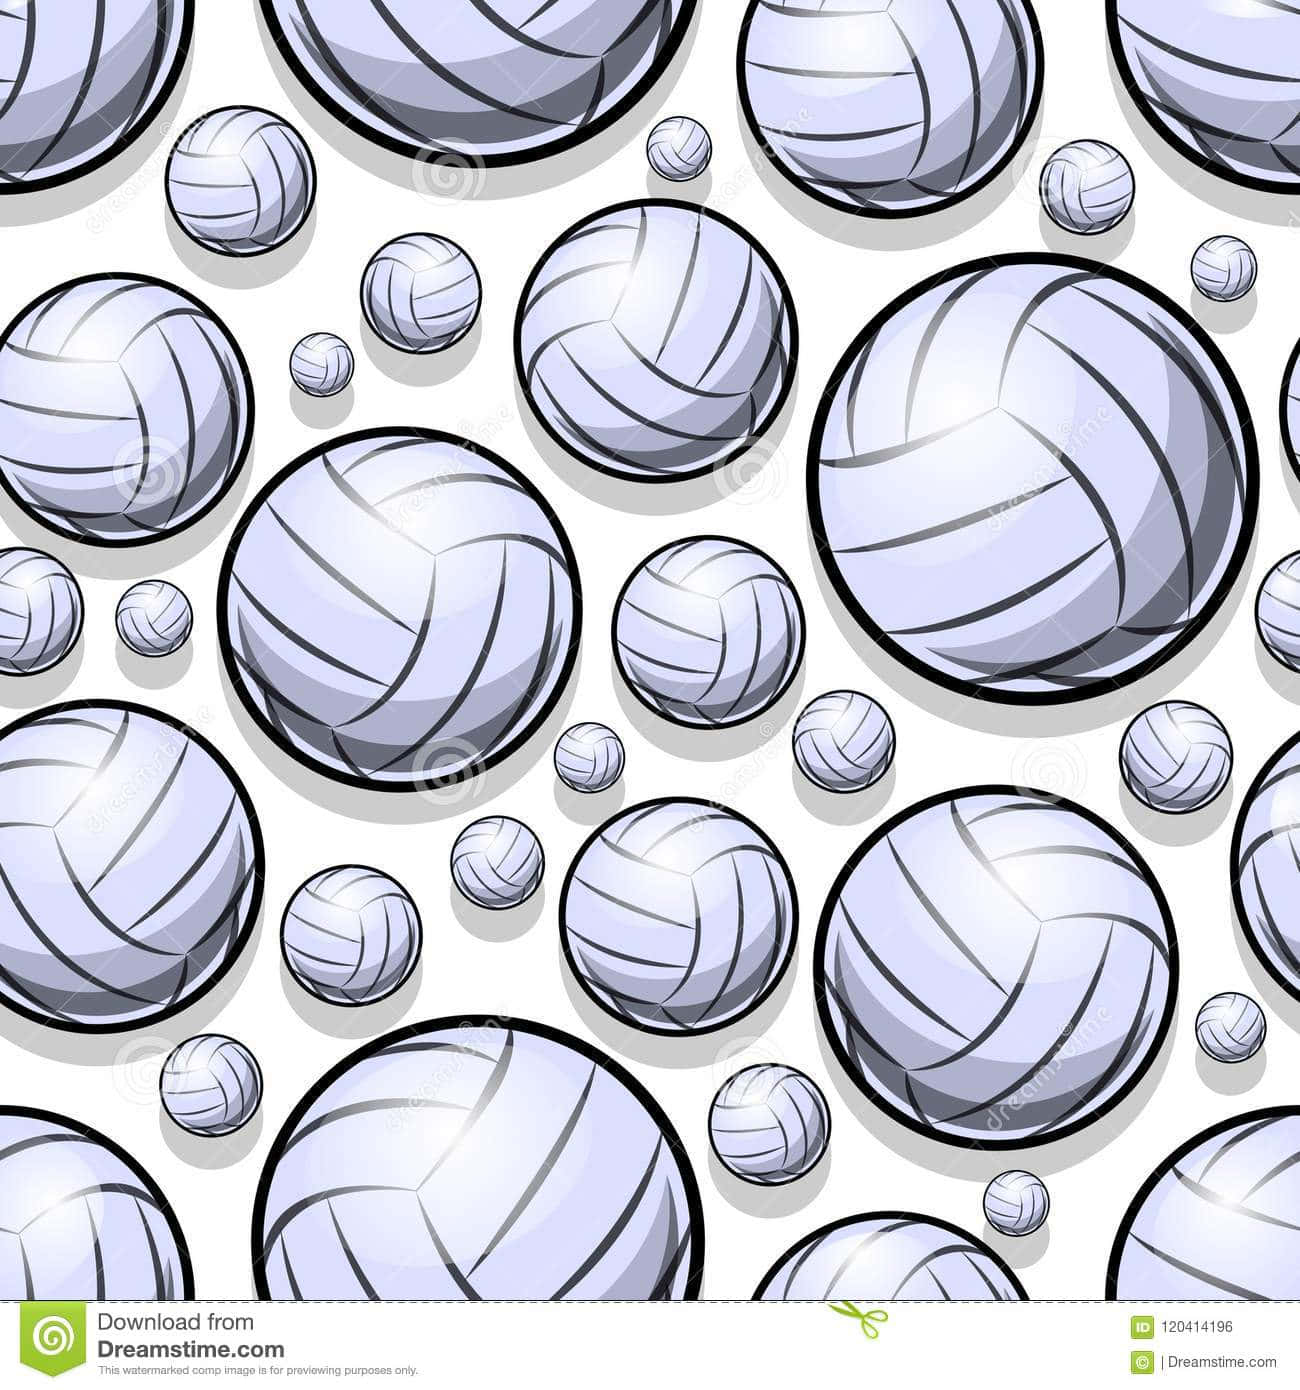 Volleyball at the ready Wallpaper